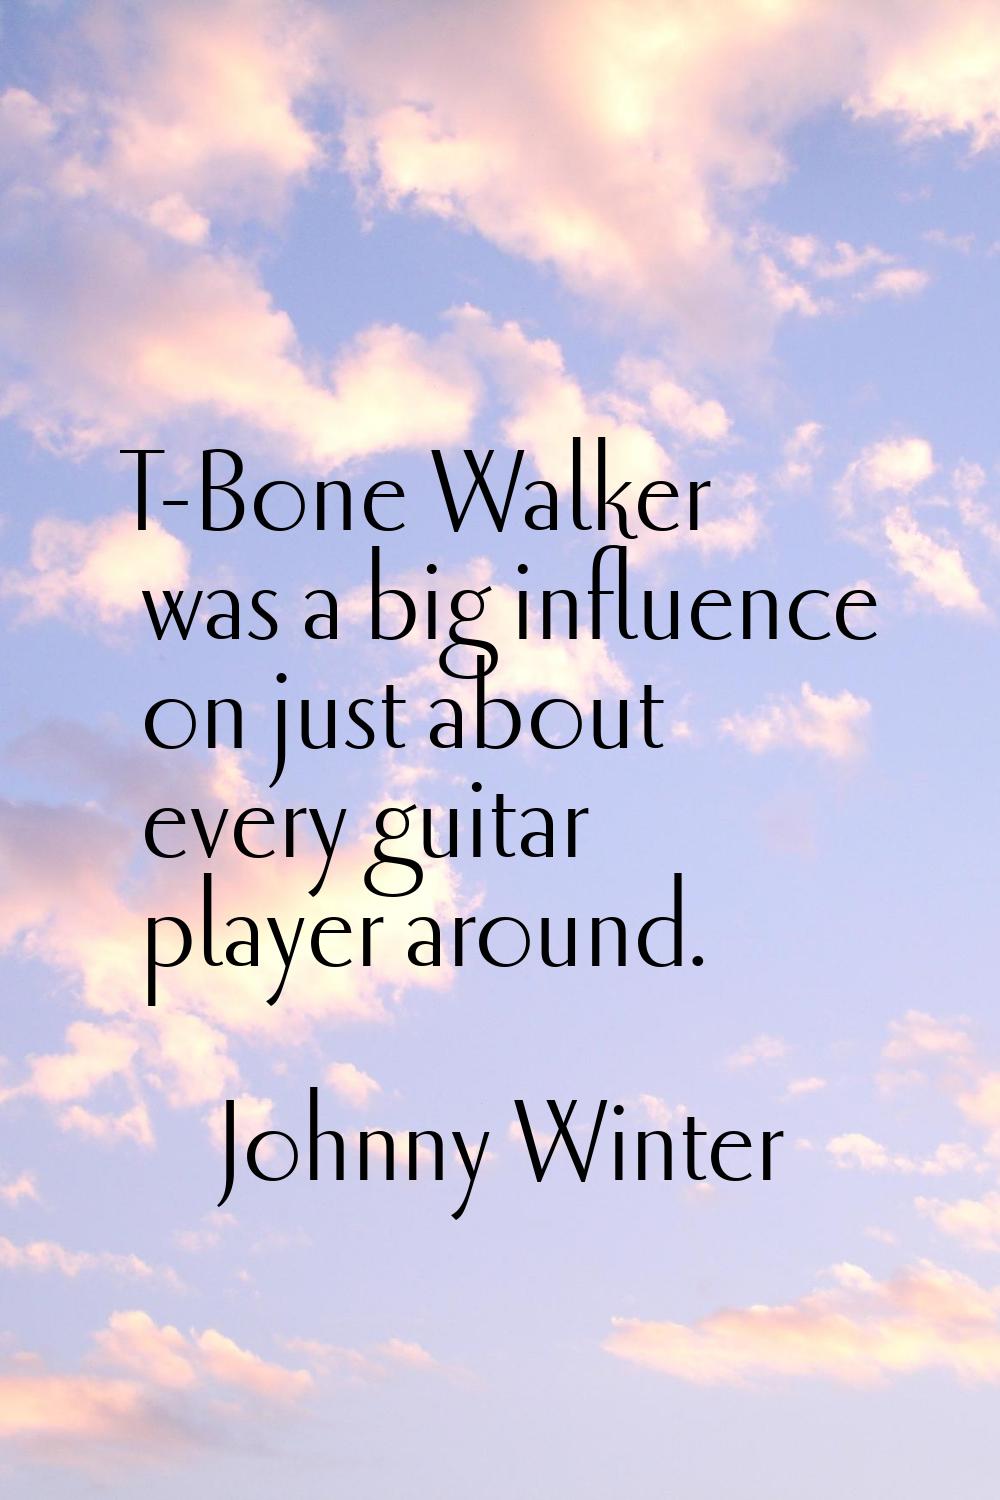 T-Bone Walker was a big influence on just about every guitar player around.